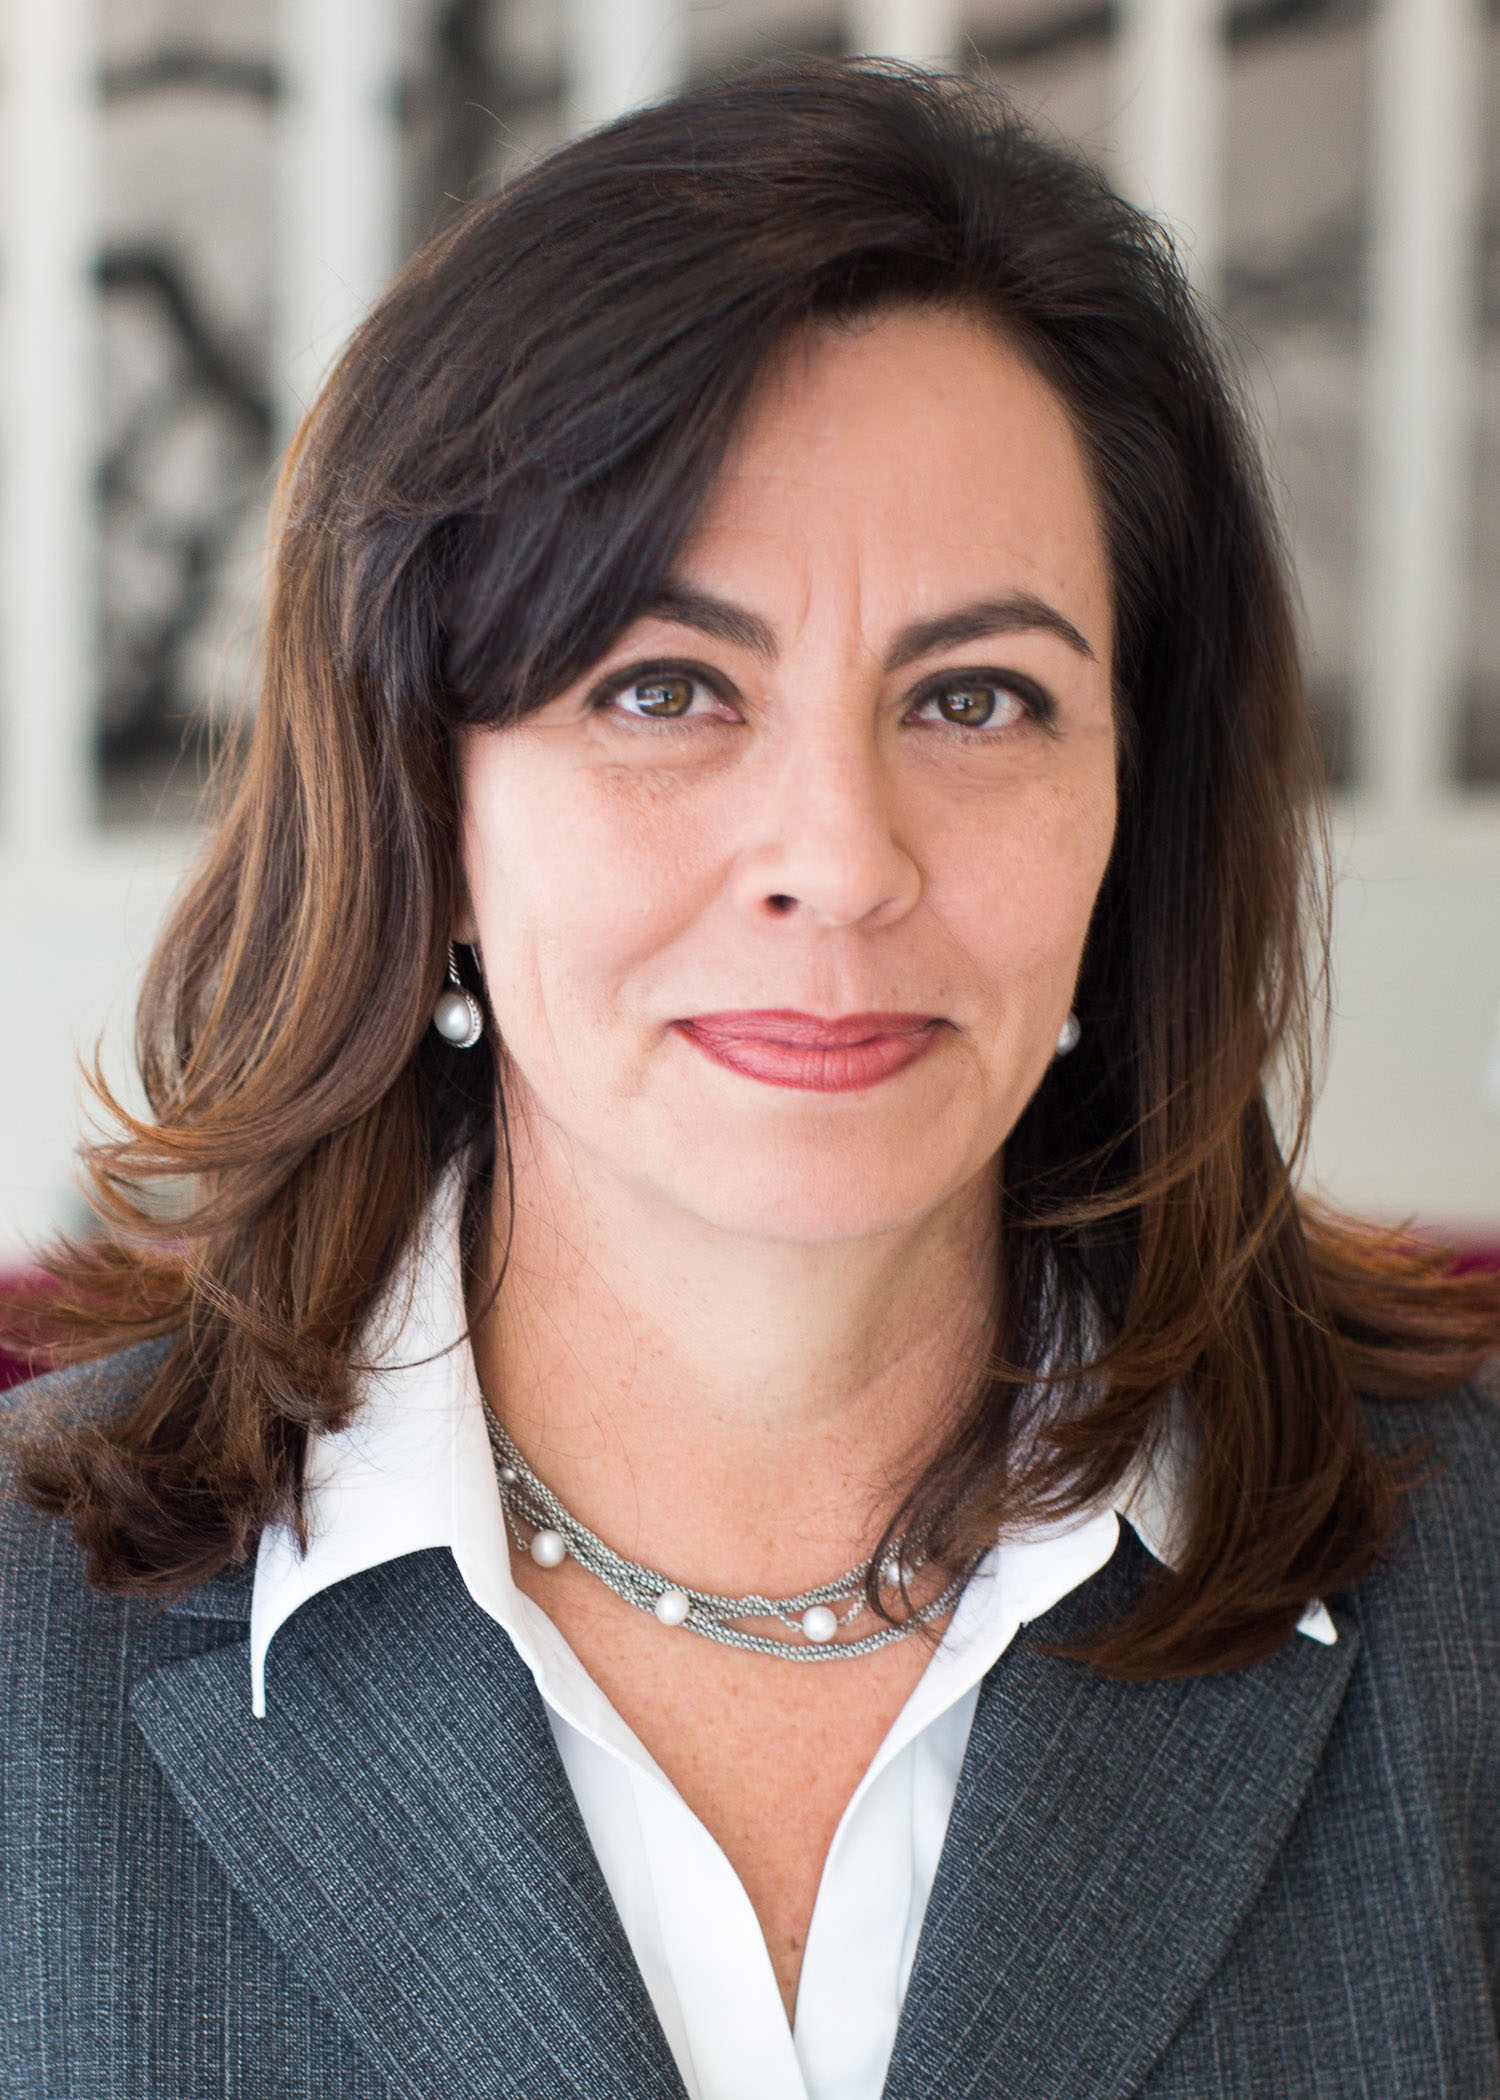 Portrait of Hilda Galvan, wearing a grey suit jacket and a necklace with pearls.